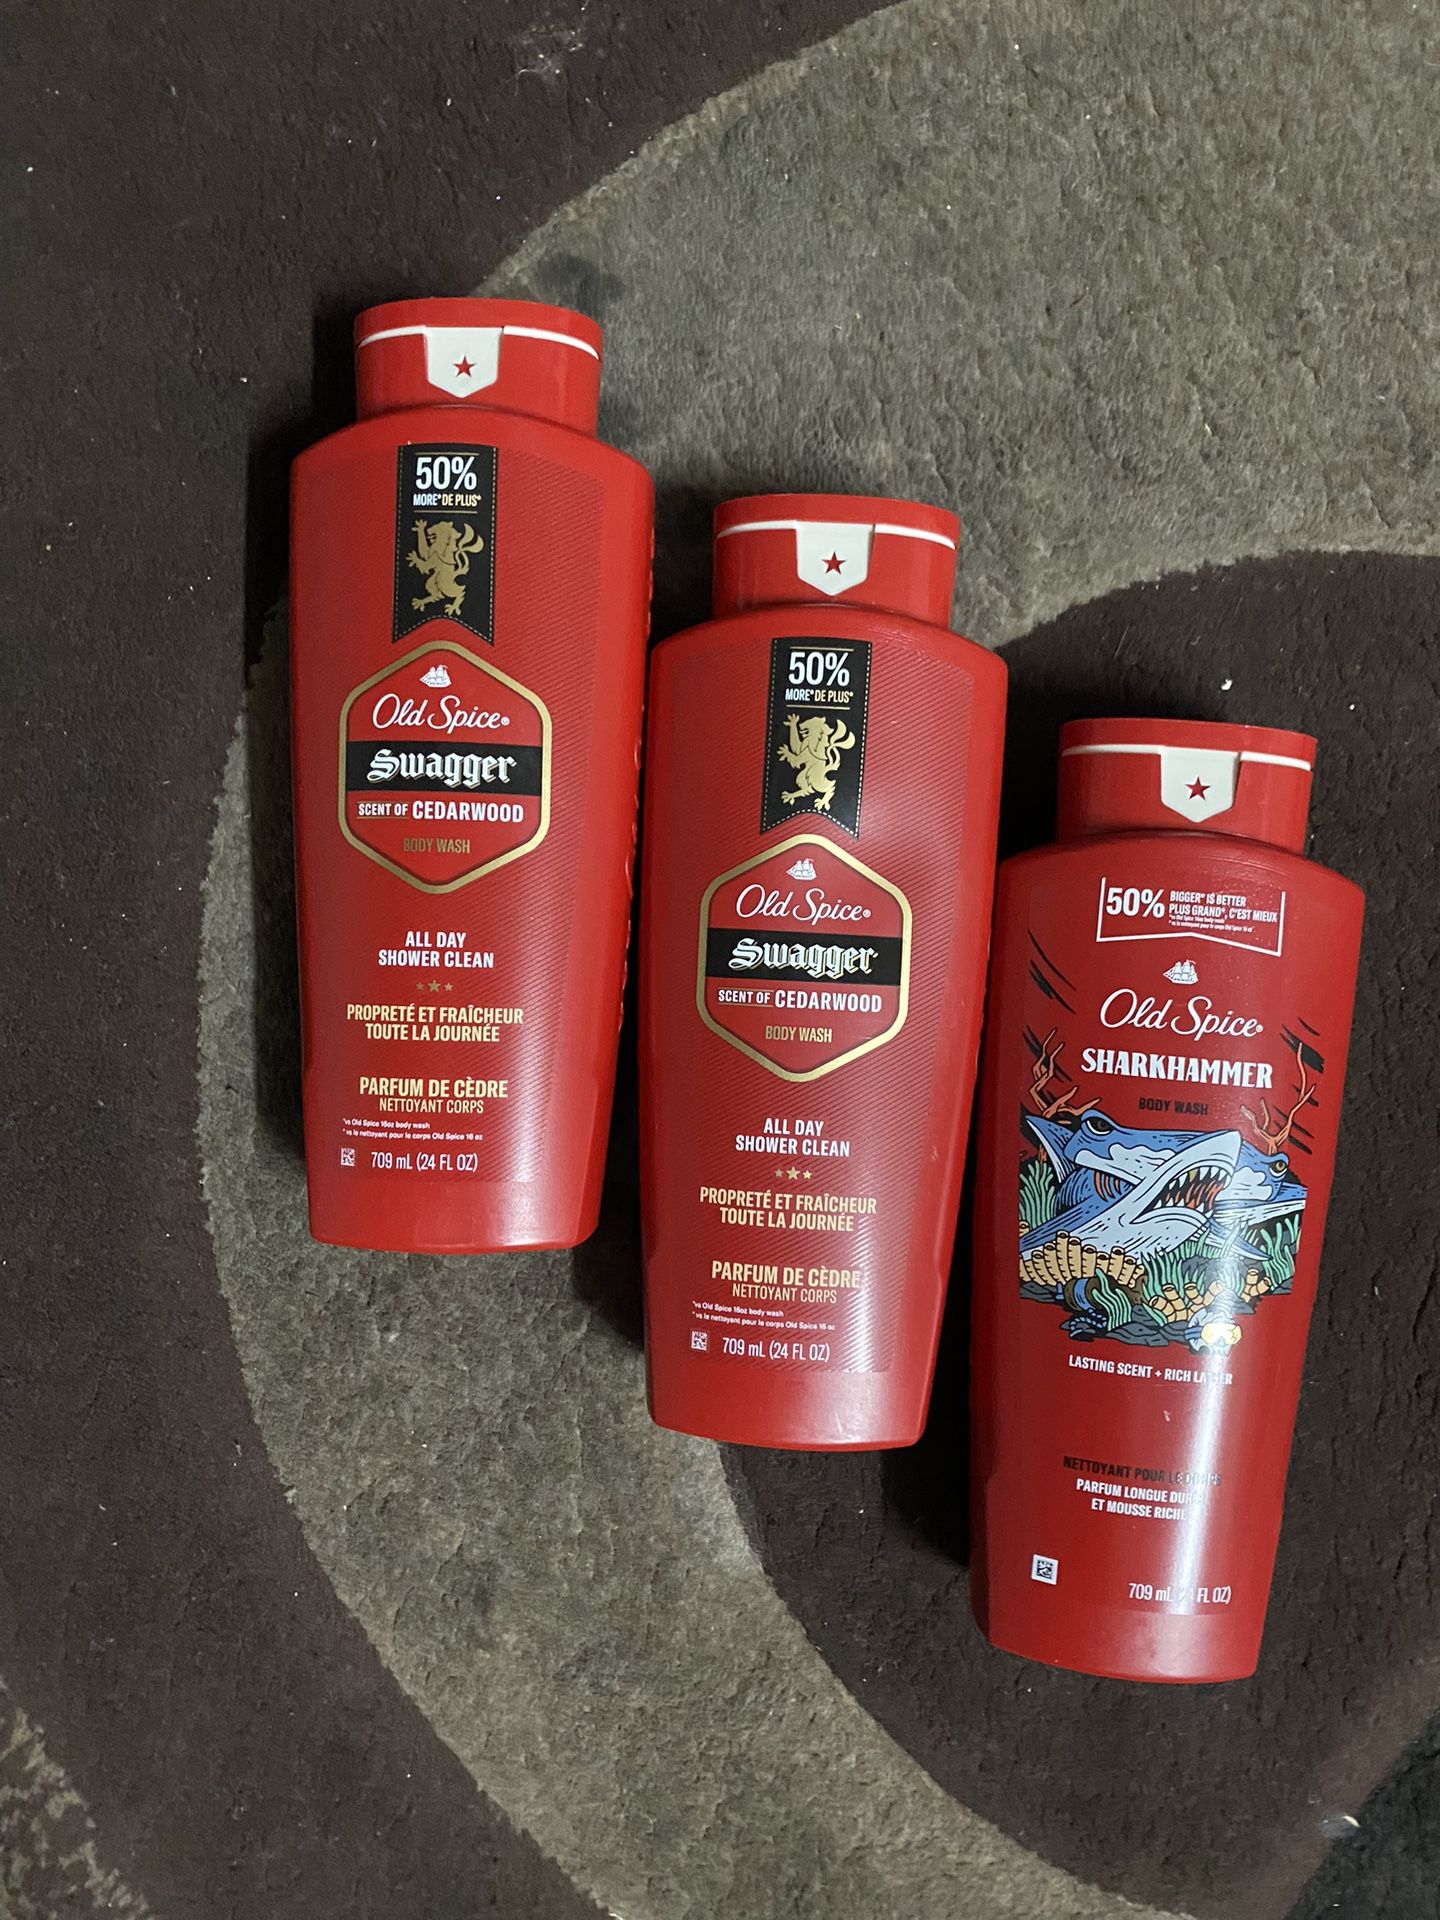 Old Spice Body Wash 3 For $12